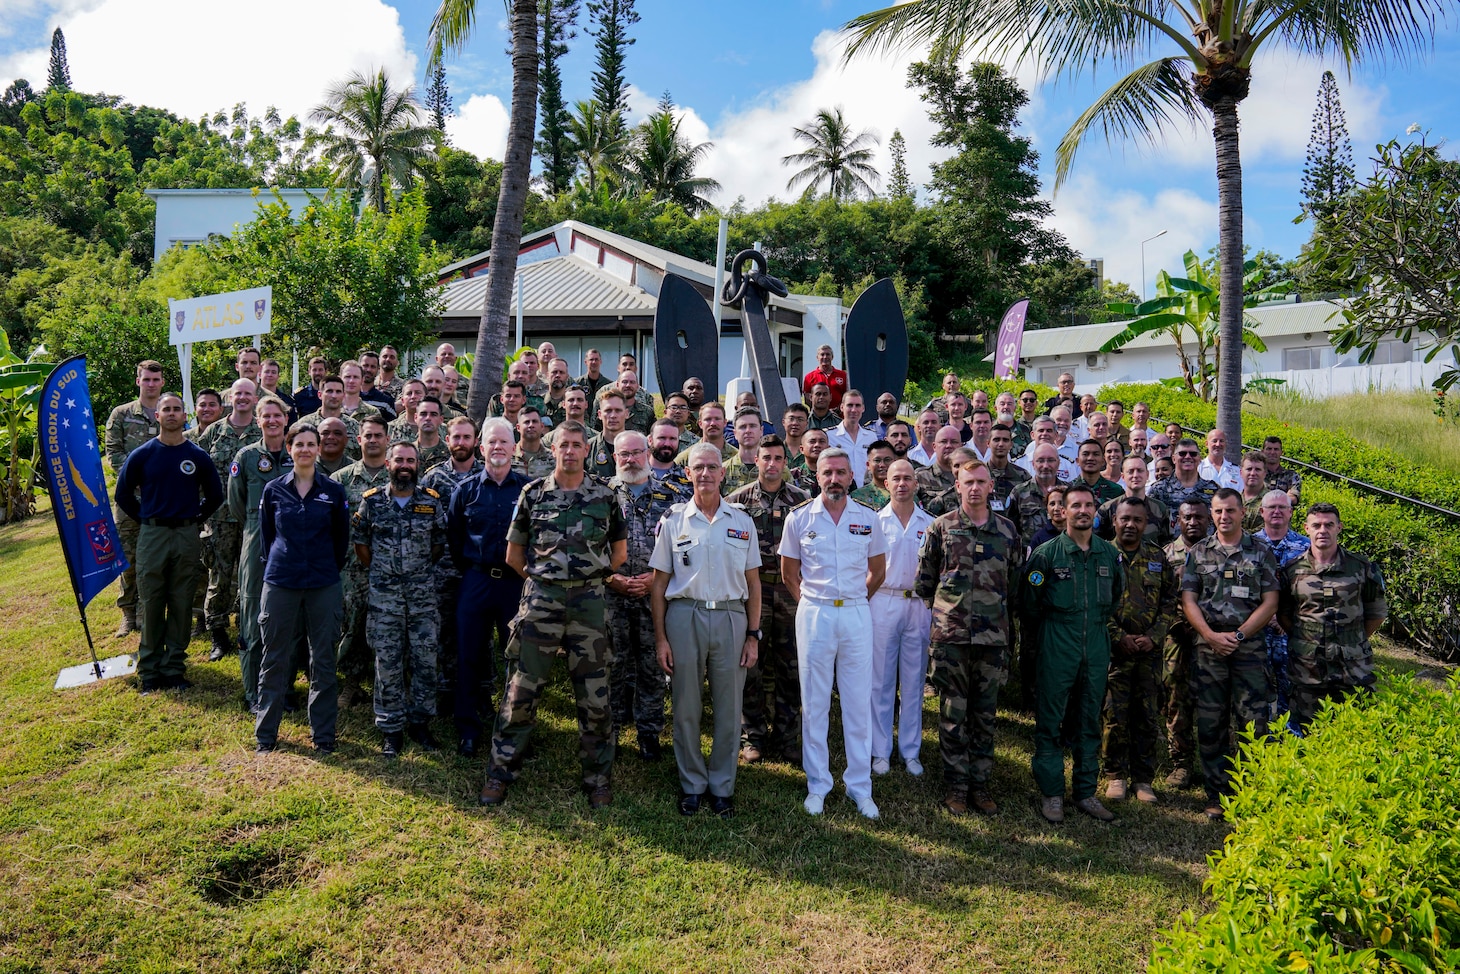 Participants of the Croix Du Sud 2023, including Sailors assigned to Independence-class littoral combat ship USS Oakland (LCS 24), pose for a photo together during the component commanders’ brief at Noumea, New Caledonia, Apr. 23, 2023. Oakland, part of Destroyer Squadron 7, is on a rotational deployment, operating in the U.S. 7th Fleet area of operations to enhance interoperability with Allies and partners and serve as a ready-response force in support of a free and open Indo-Pacific region. (U.S. Navy photo by Mass Communication Specialist 2nd Class Sang Kim)